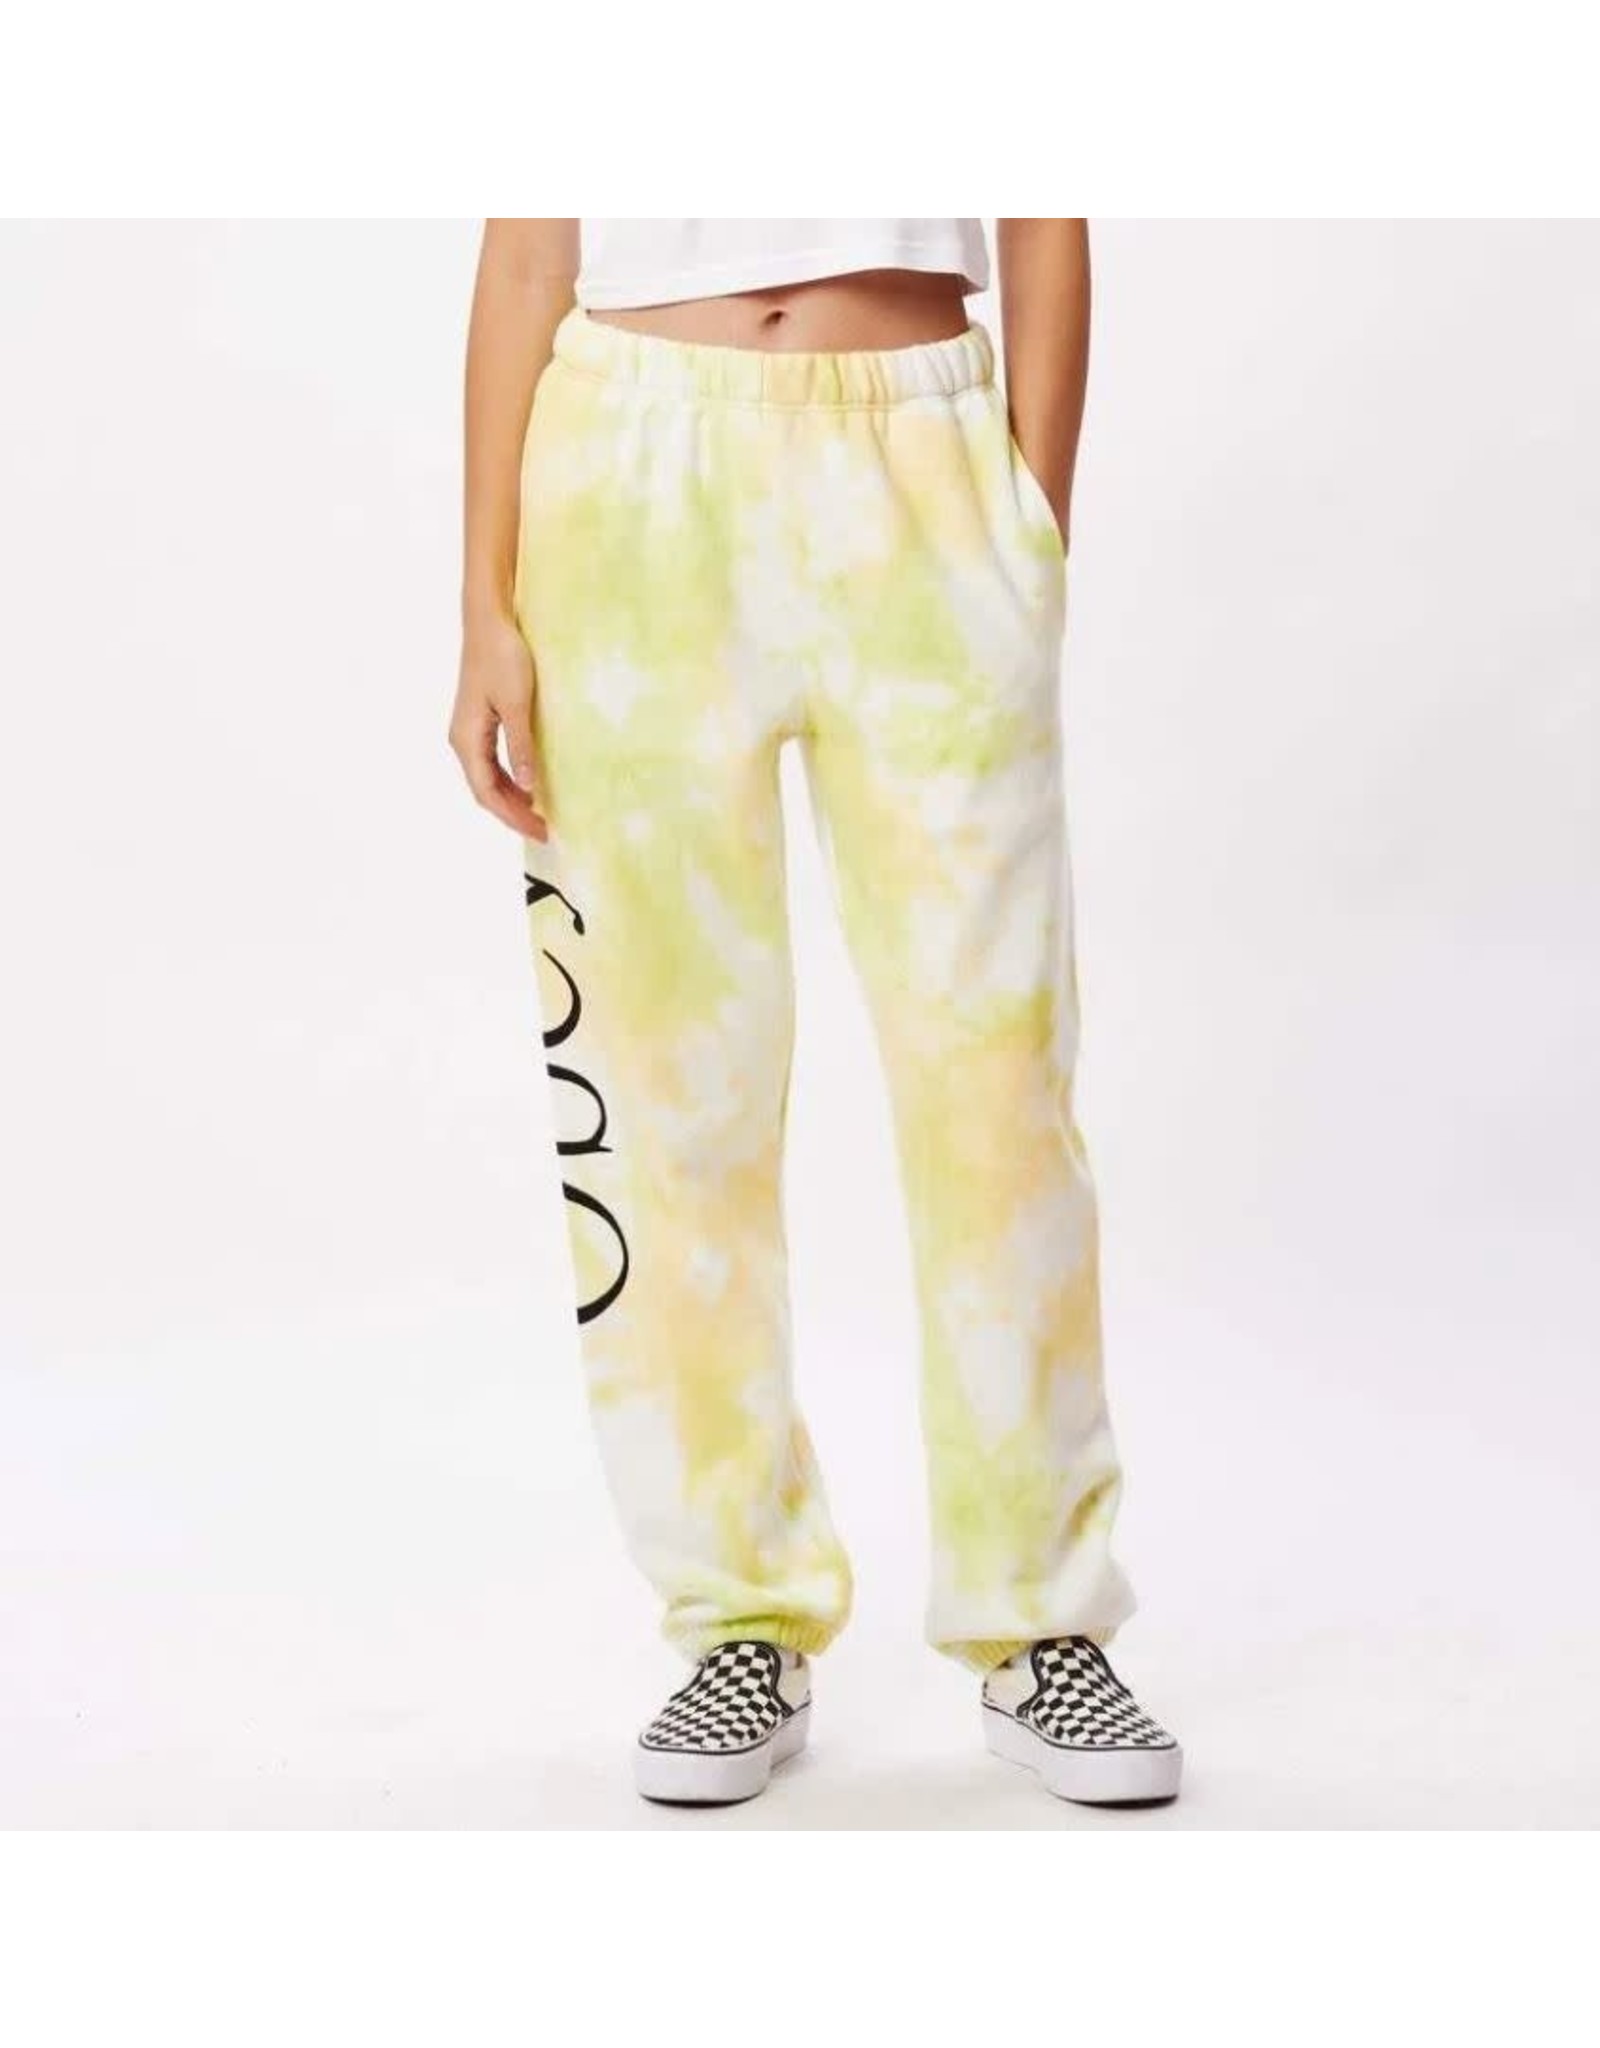 OBEY Limitless Sweatpant